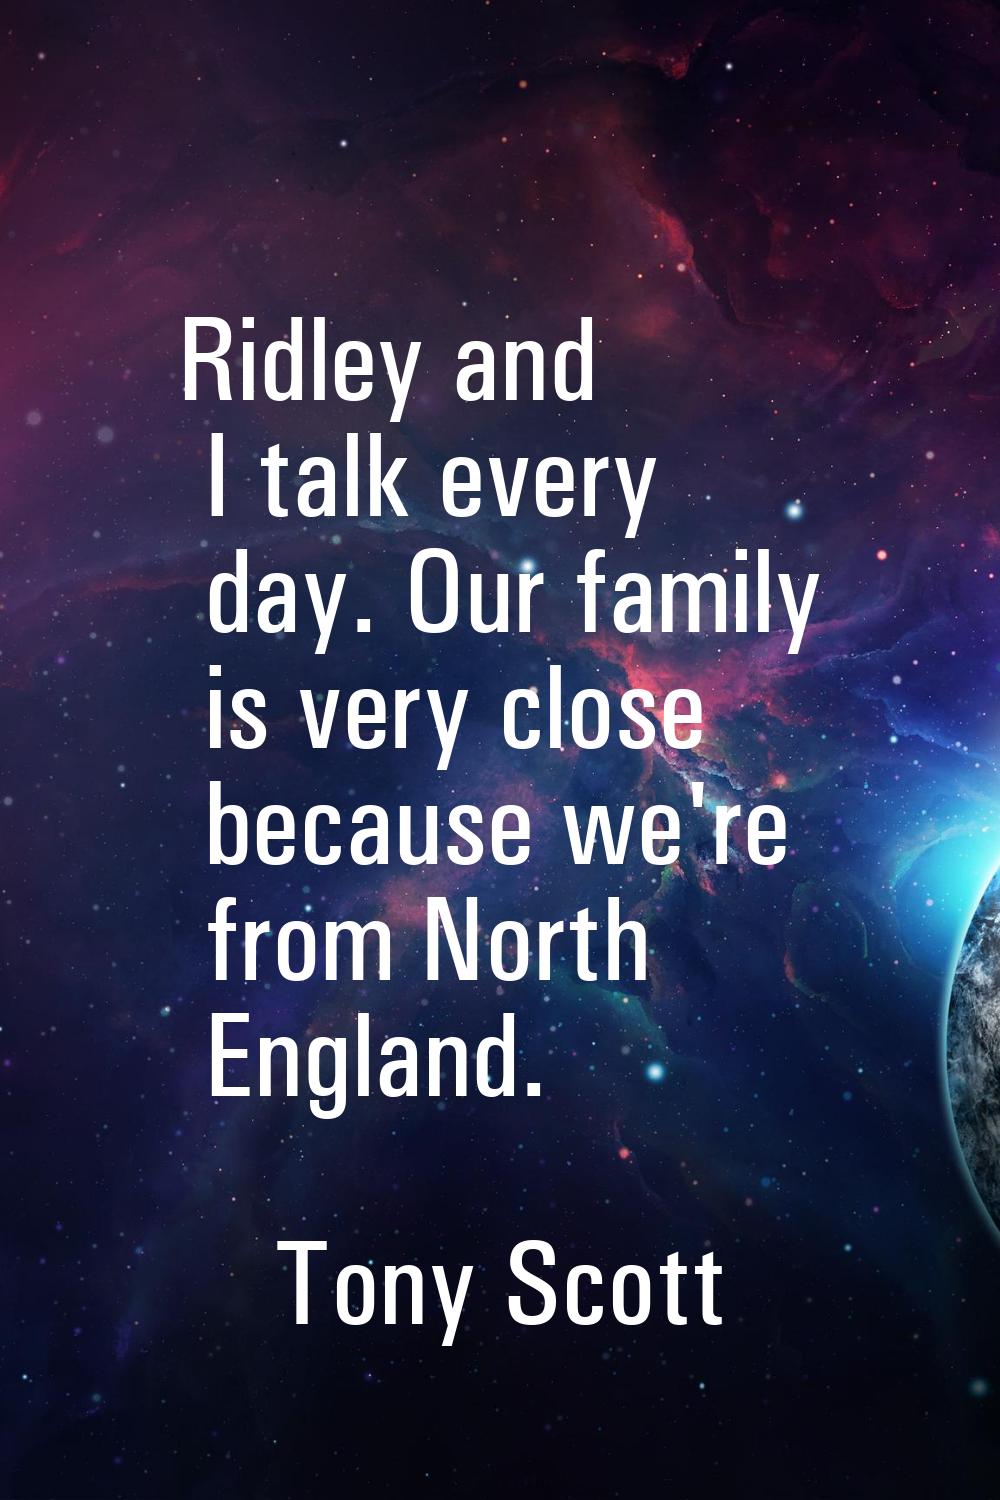 Ridley and I talk every day. Our family is very close because we're from North England.